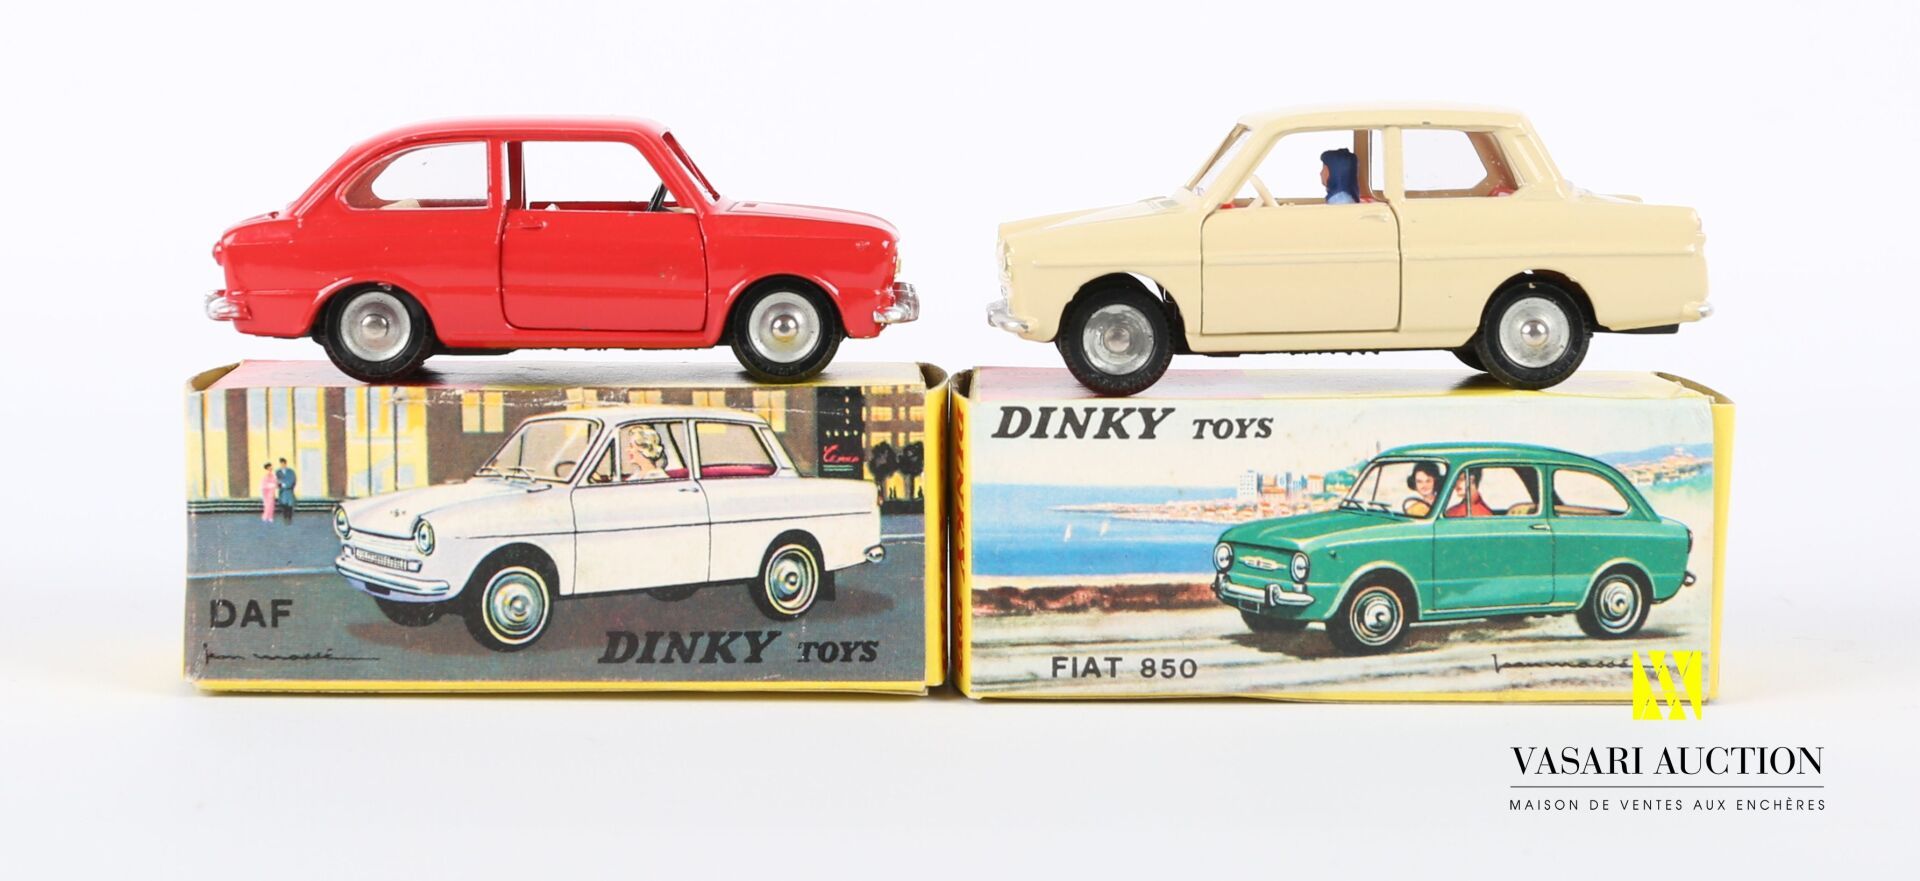 Null DINKY TOYS (FR)

Lot of two vehicles : DAF Ref 508 - Fiat 850 Ref 509

(ori&hellip;